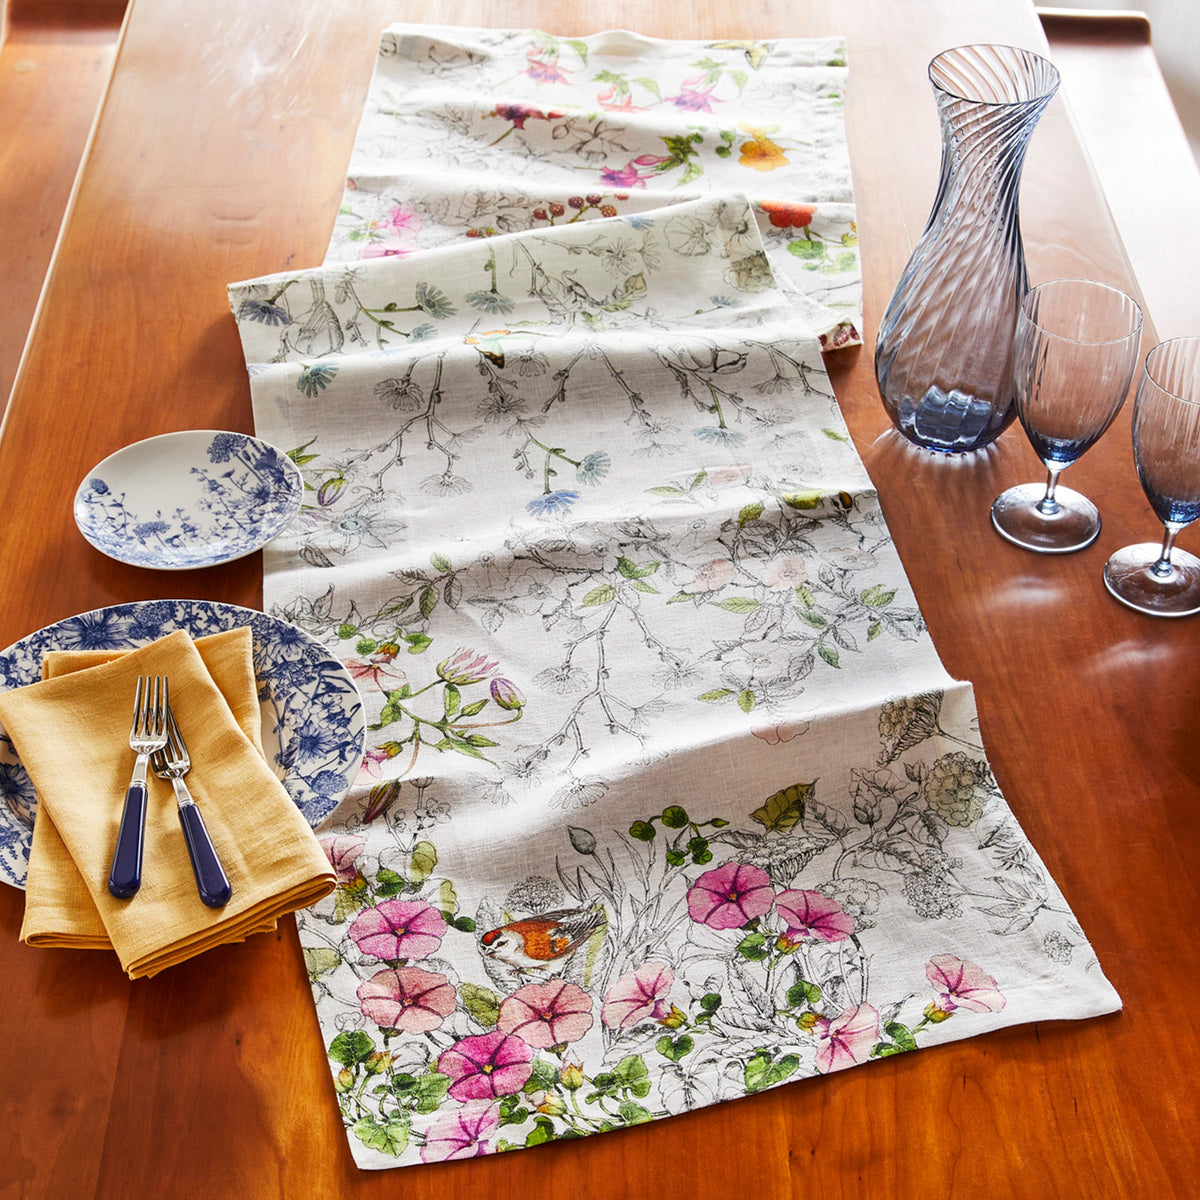 A Marigold Linen Dinner Napkins Set/4 with blue and white flowers on it, sourced sustainably from an Italian mill.